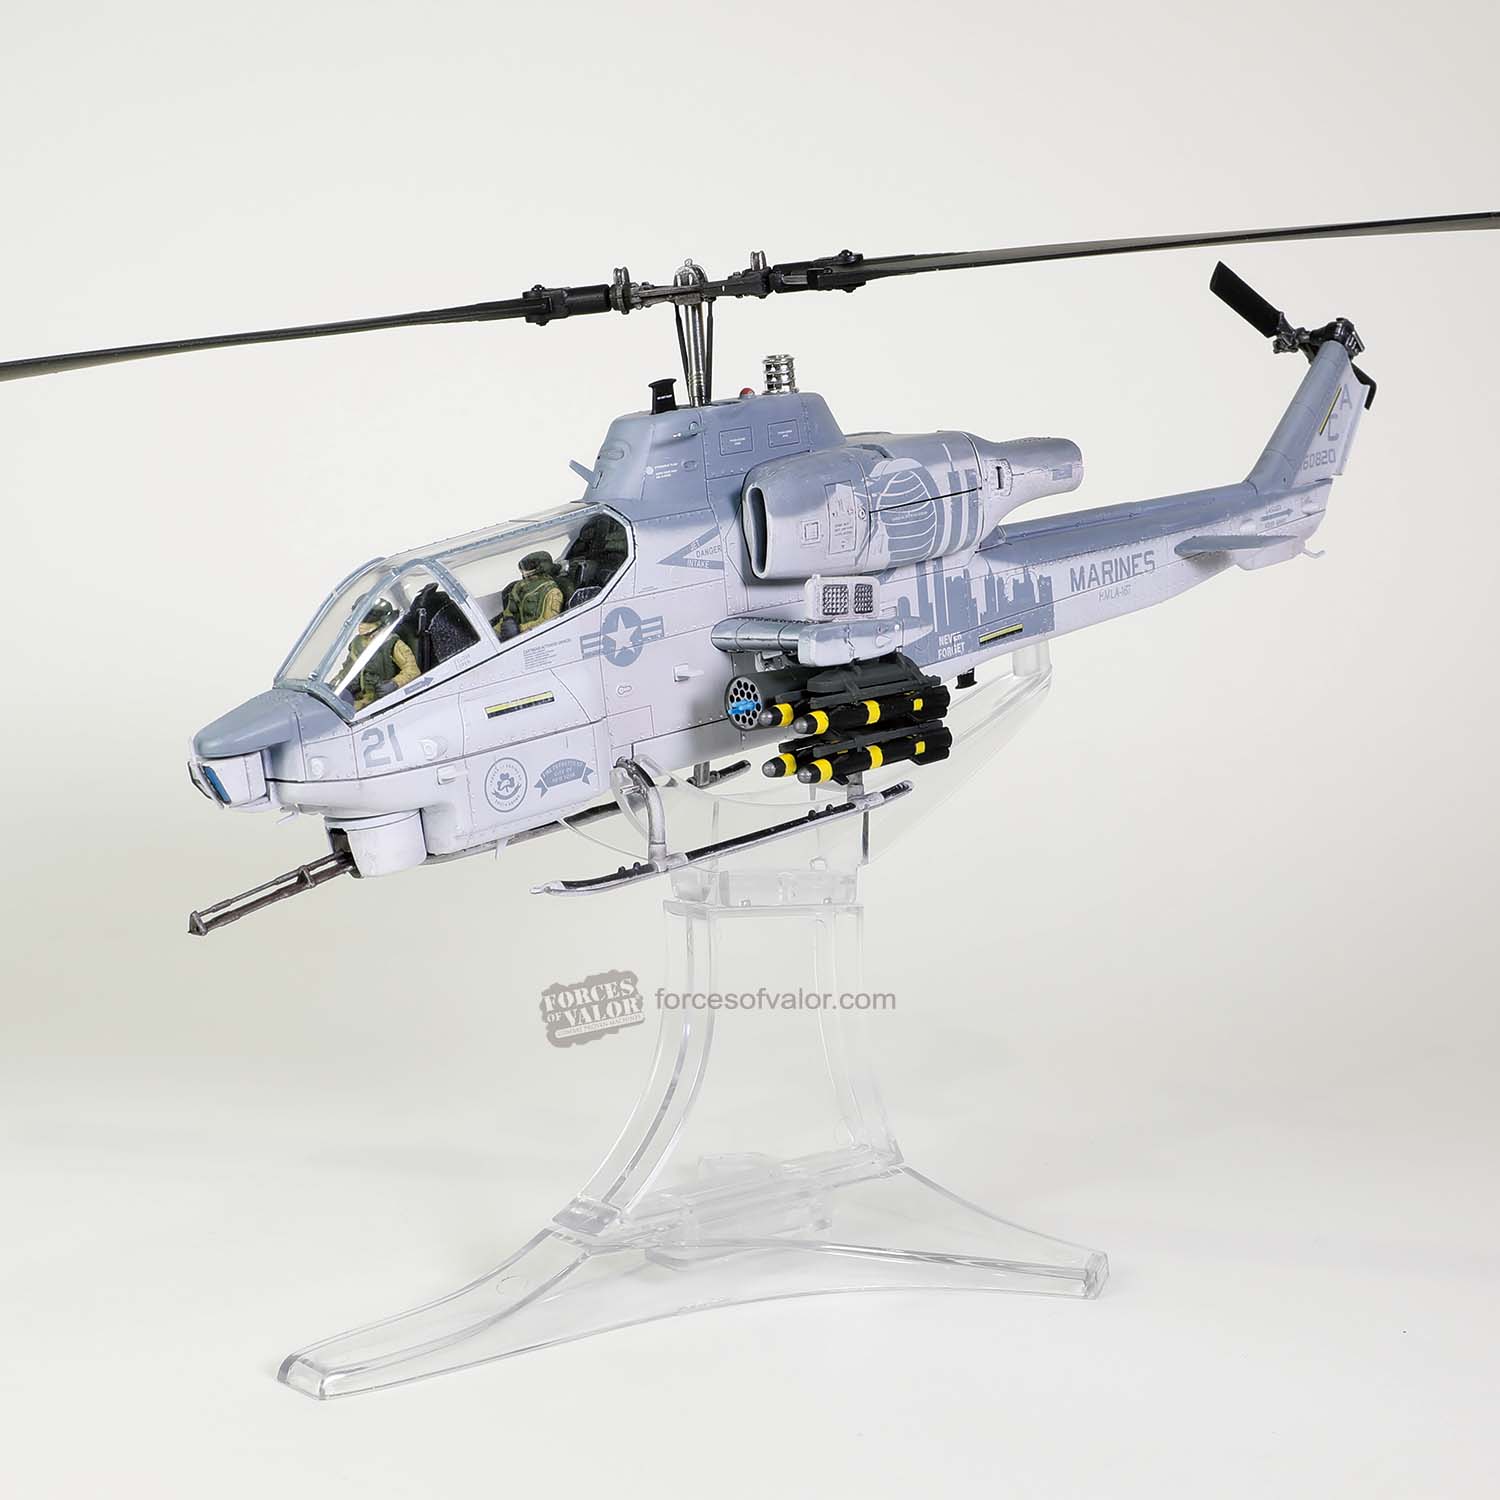 forcesofvalor-FOV-820004A-2-2-US-Marine-Corps-Bell-AH-1W-Whiskey-Cobra-Helicopter-NTS-911-tribute-scheme-Camp-Bastion